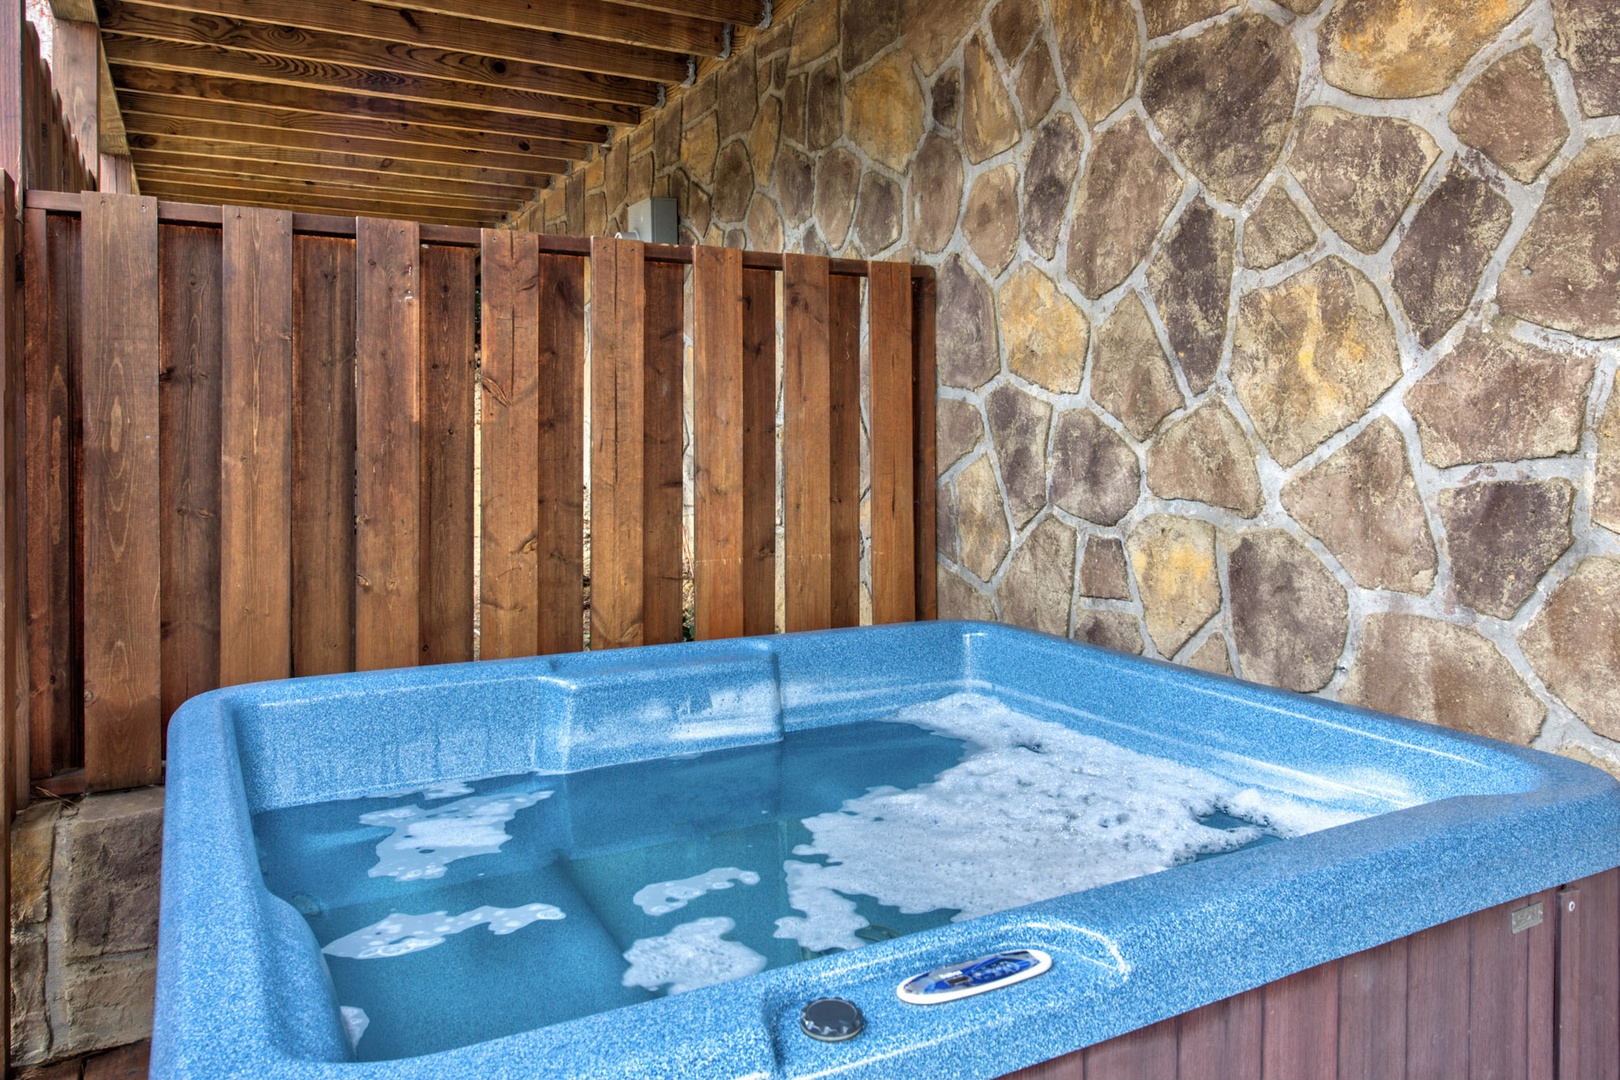 Relax and unwind in the private hot tub